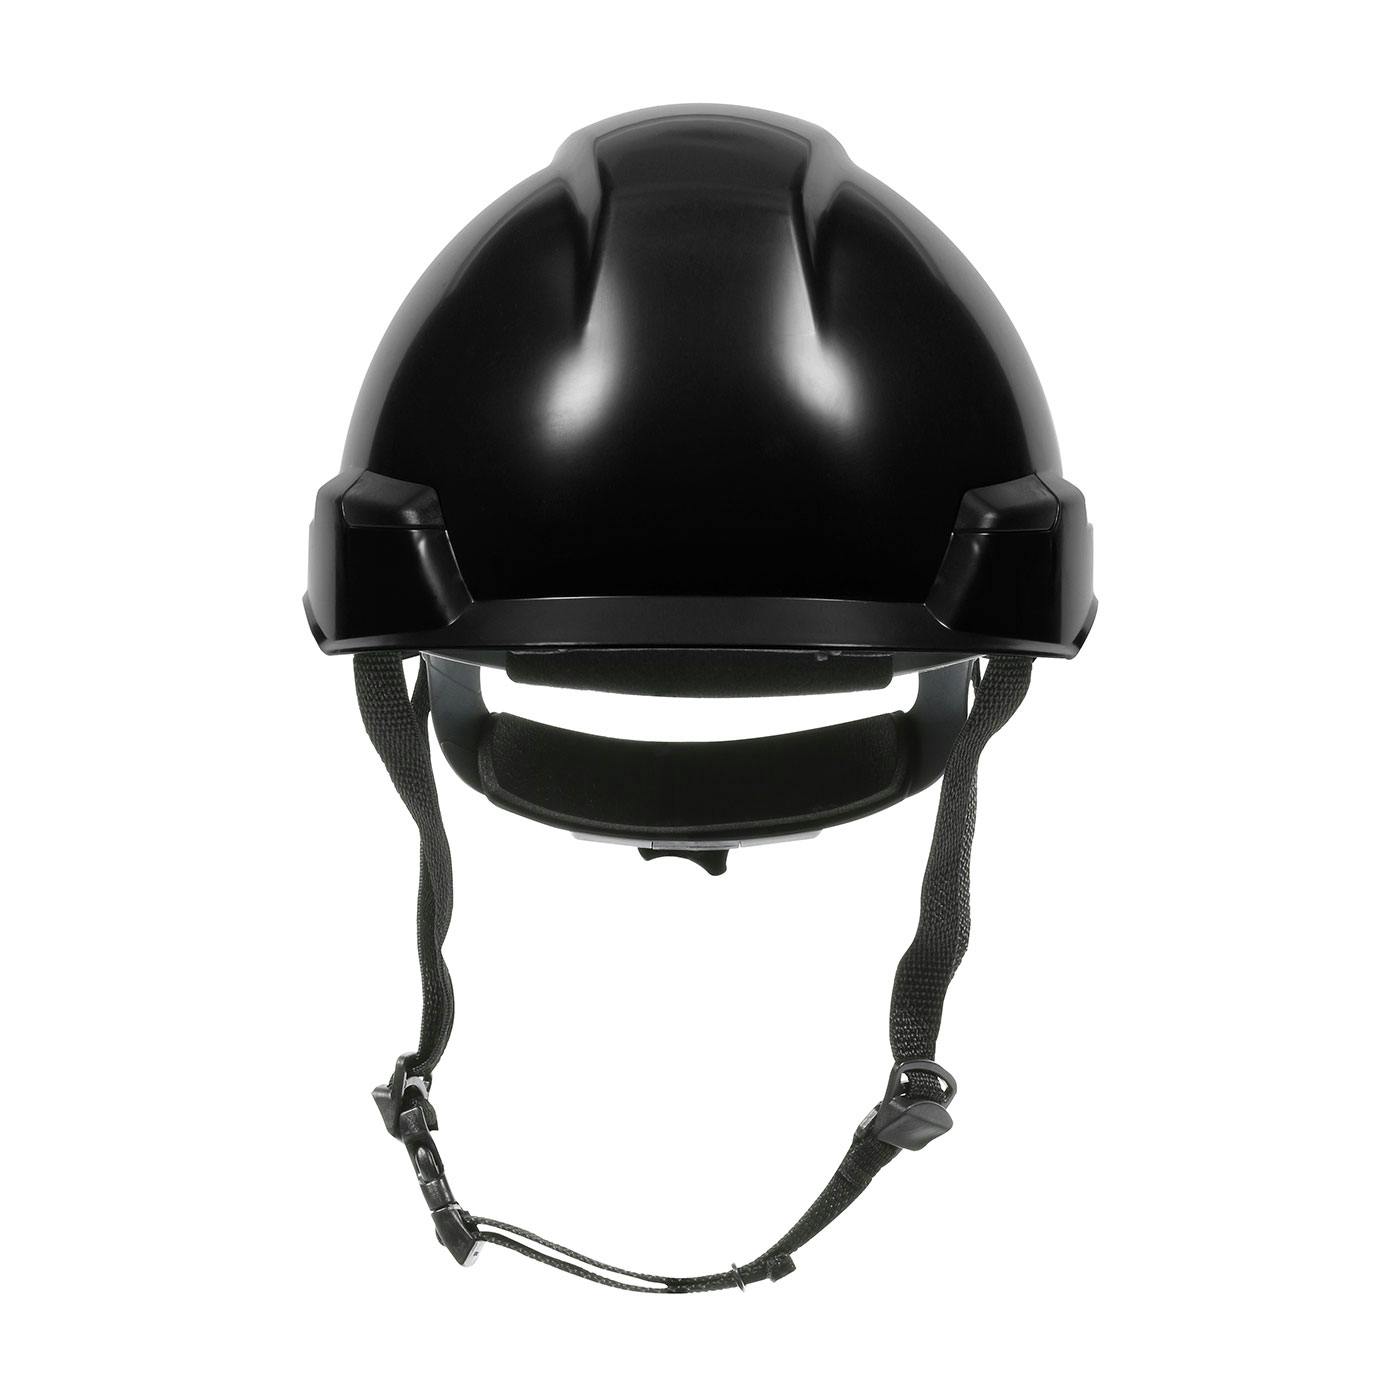 Rocky™ Industrial Climbing Helmet with Polycarbonate / ABS Shell, Hi-Density Foam Impact Liner, Nylon Suspension, Wheel Ratchet Adjustment and 4-Point Chin Strap (280-HP142R)_1